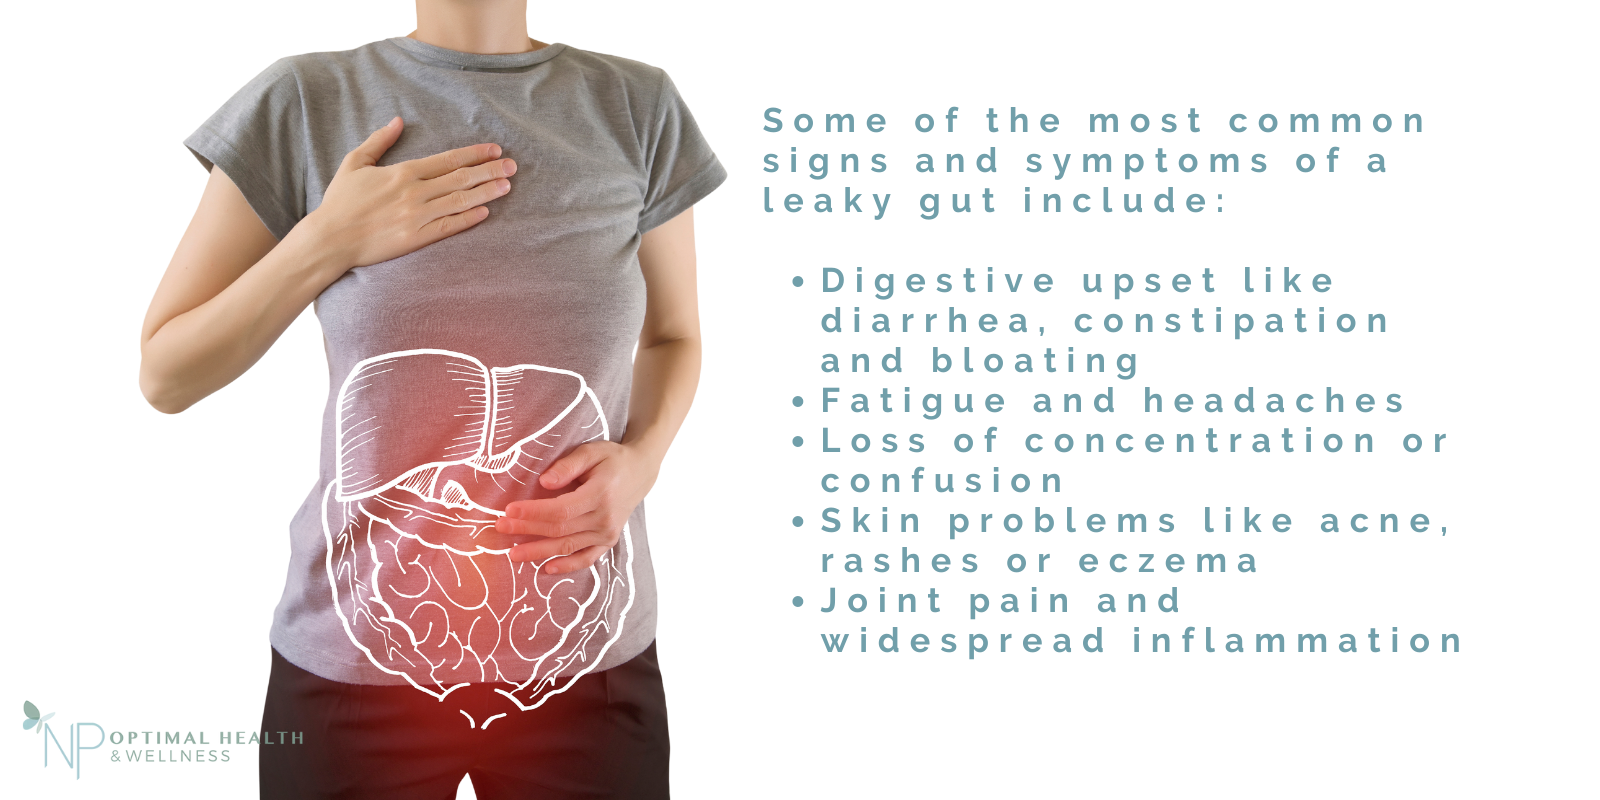 Some of the most common signs and symptoms of a leaky gut include: digestive upset, fatigue and headaches, loss of concentration, skin conditions and joint pain. 